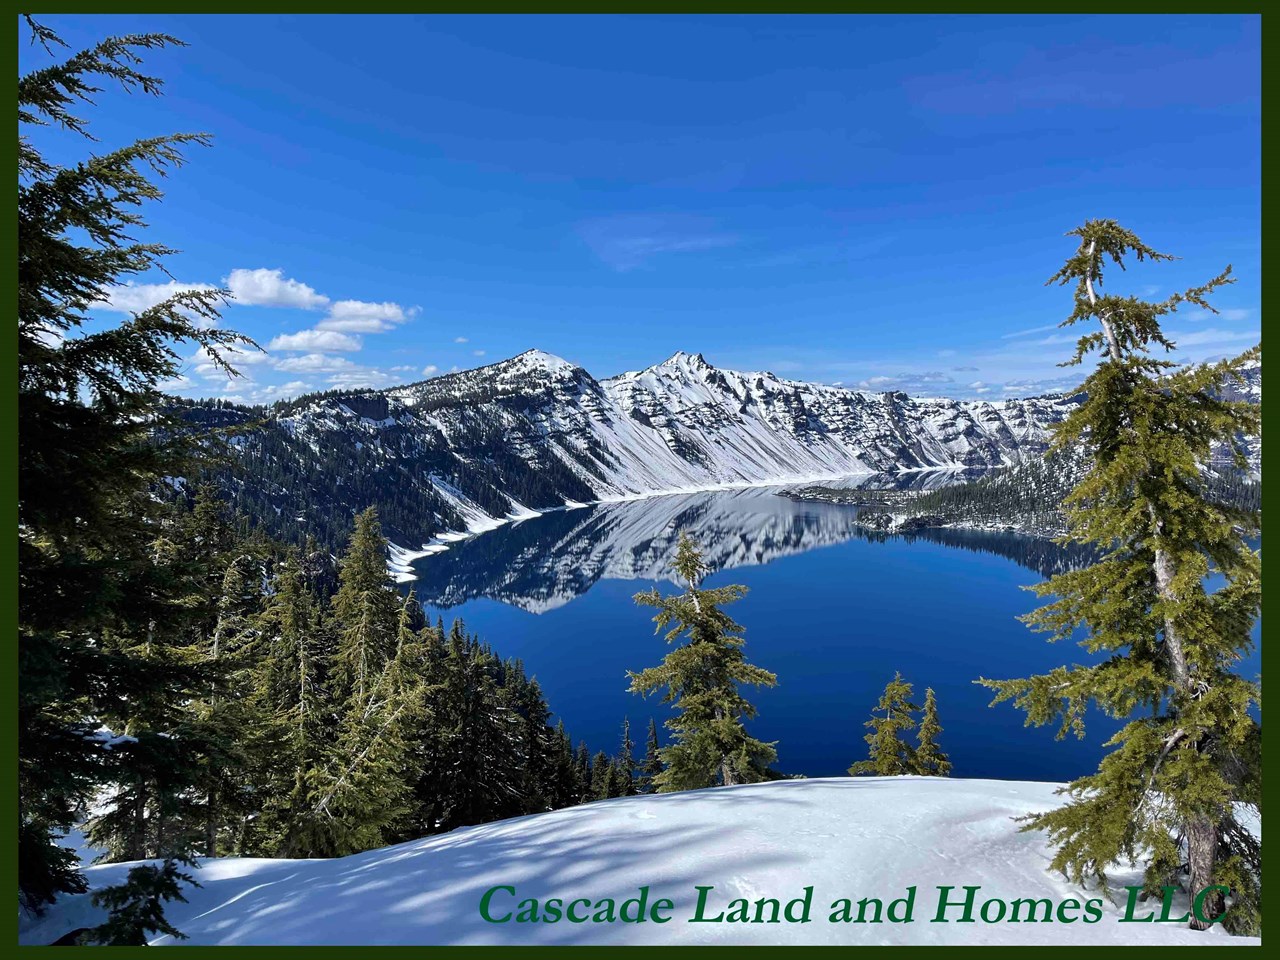 crater lake national park is just 40 miles away and is oregon’s only national park! crater lake is fed from rain and snow melt and is amazingly clear. at 1,949 feet deep, it is the deepest lake in the nation and is absolutely breathtaking! the entire park is an area of immeasurable beauty!